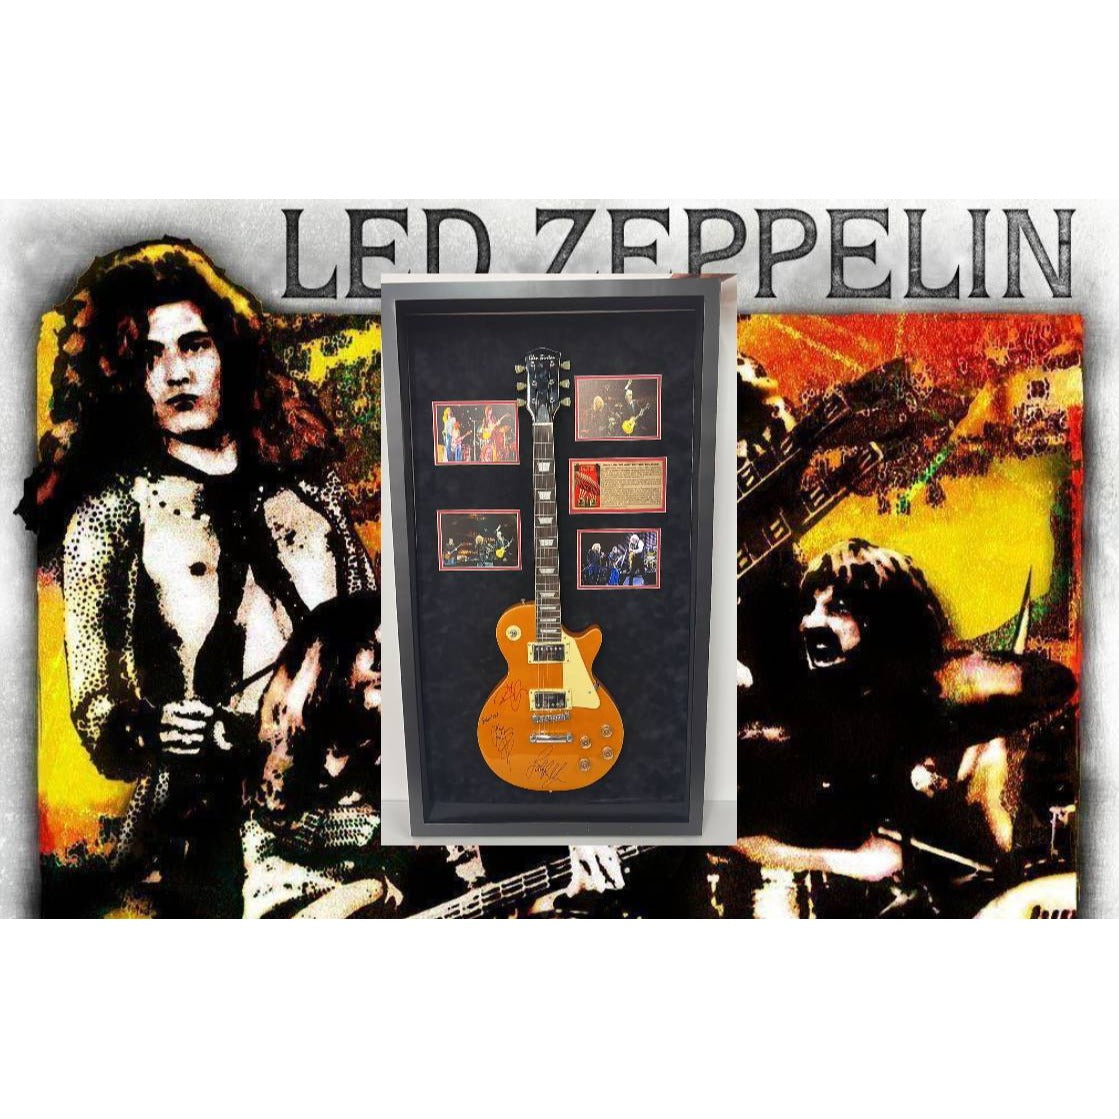 Led Zeppelin Jimmy Page Robert Plant John Paul Jones gold electric less Paul like Jimmy played  signed and framed with proof